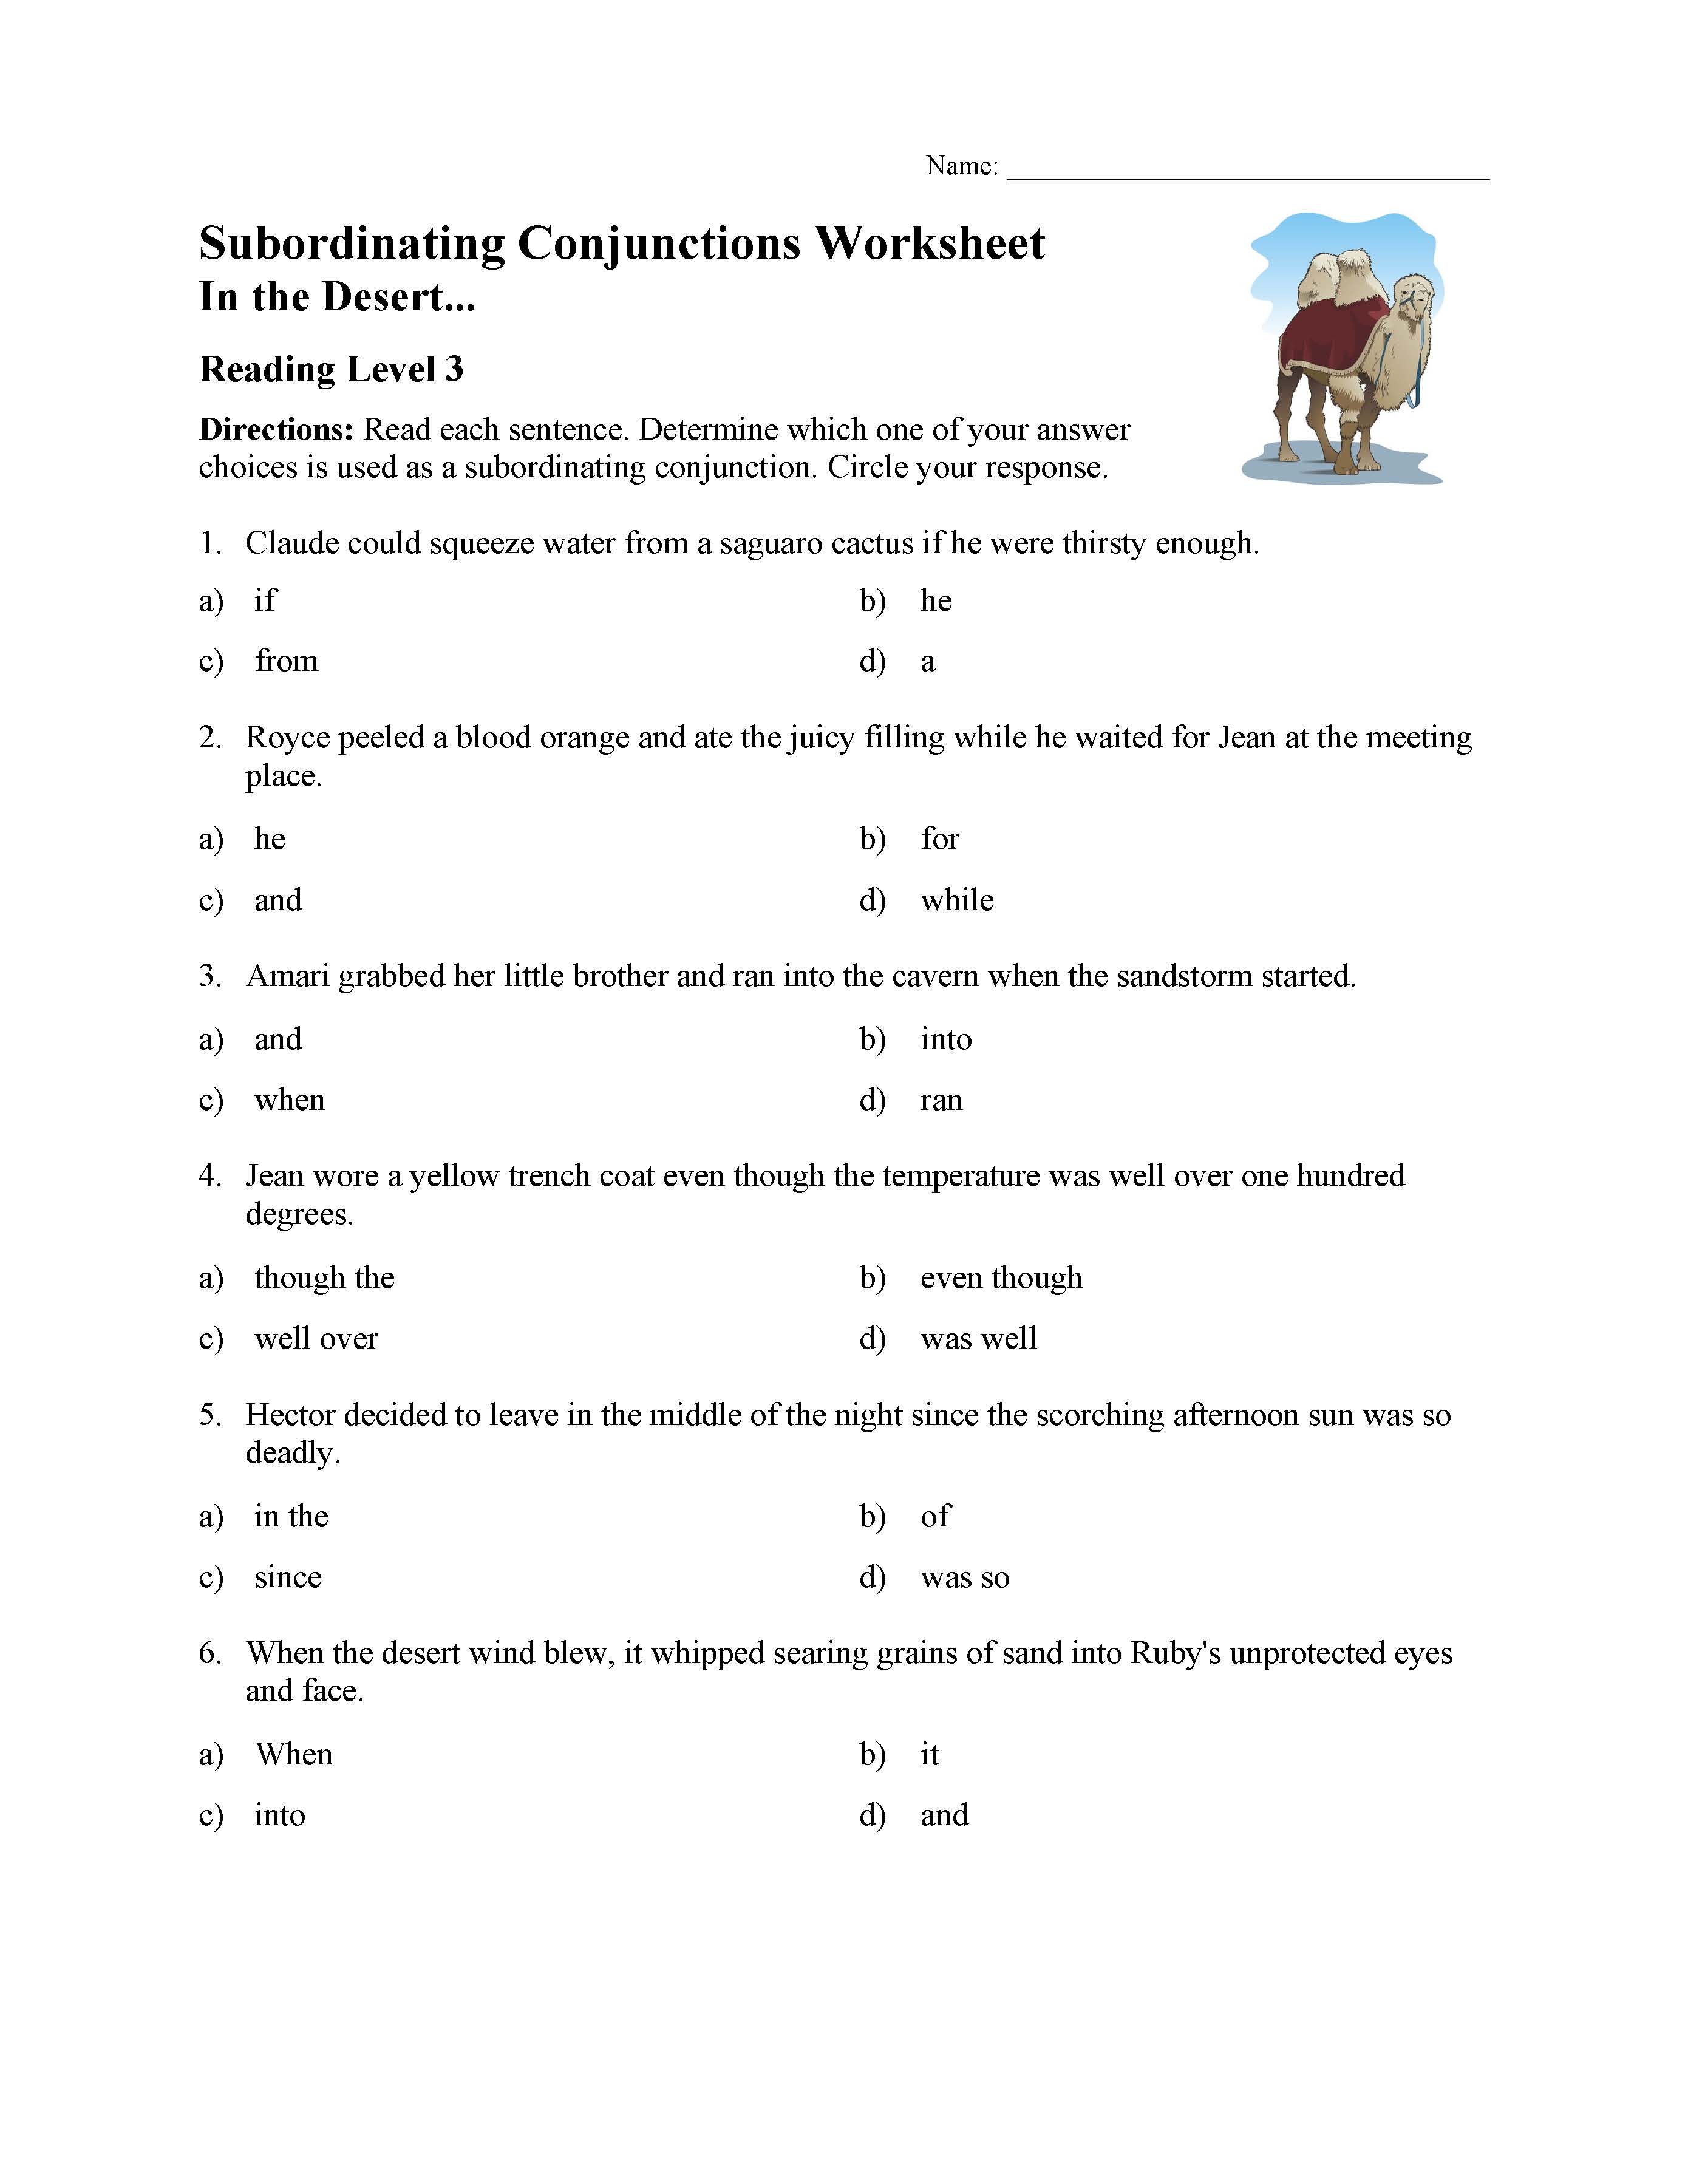 Subordinating Conjunctions Worksheet Reading Level 3 Preview